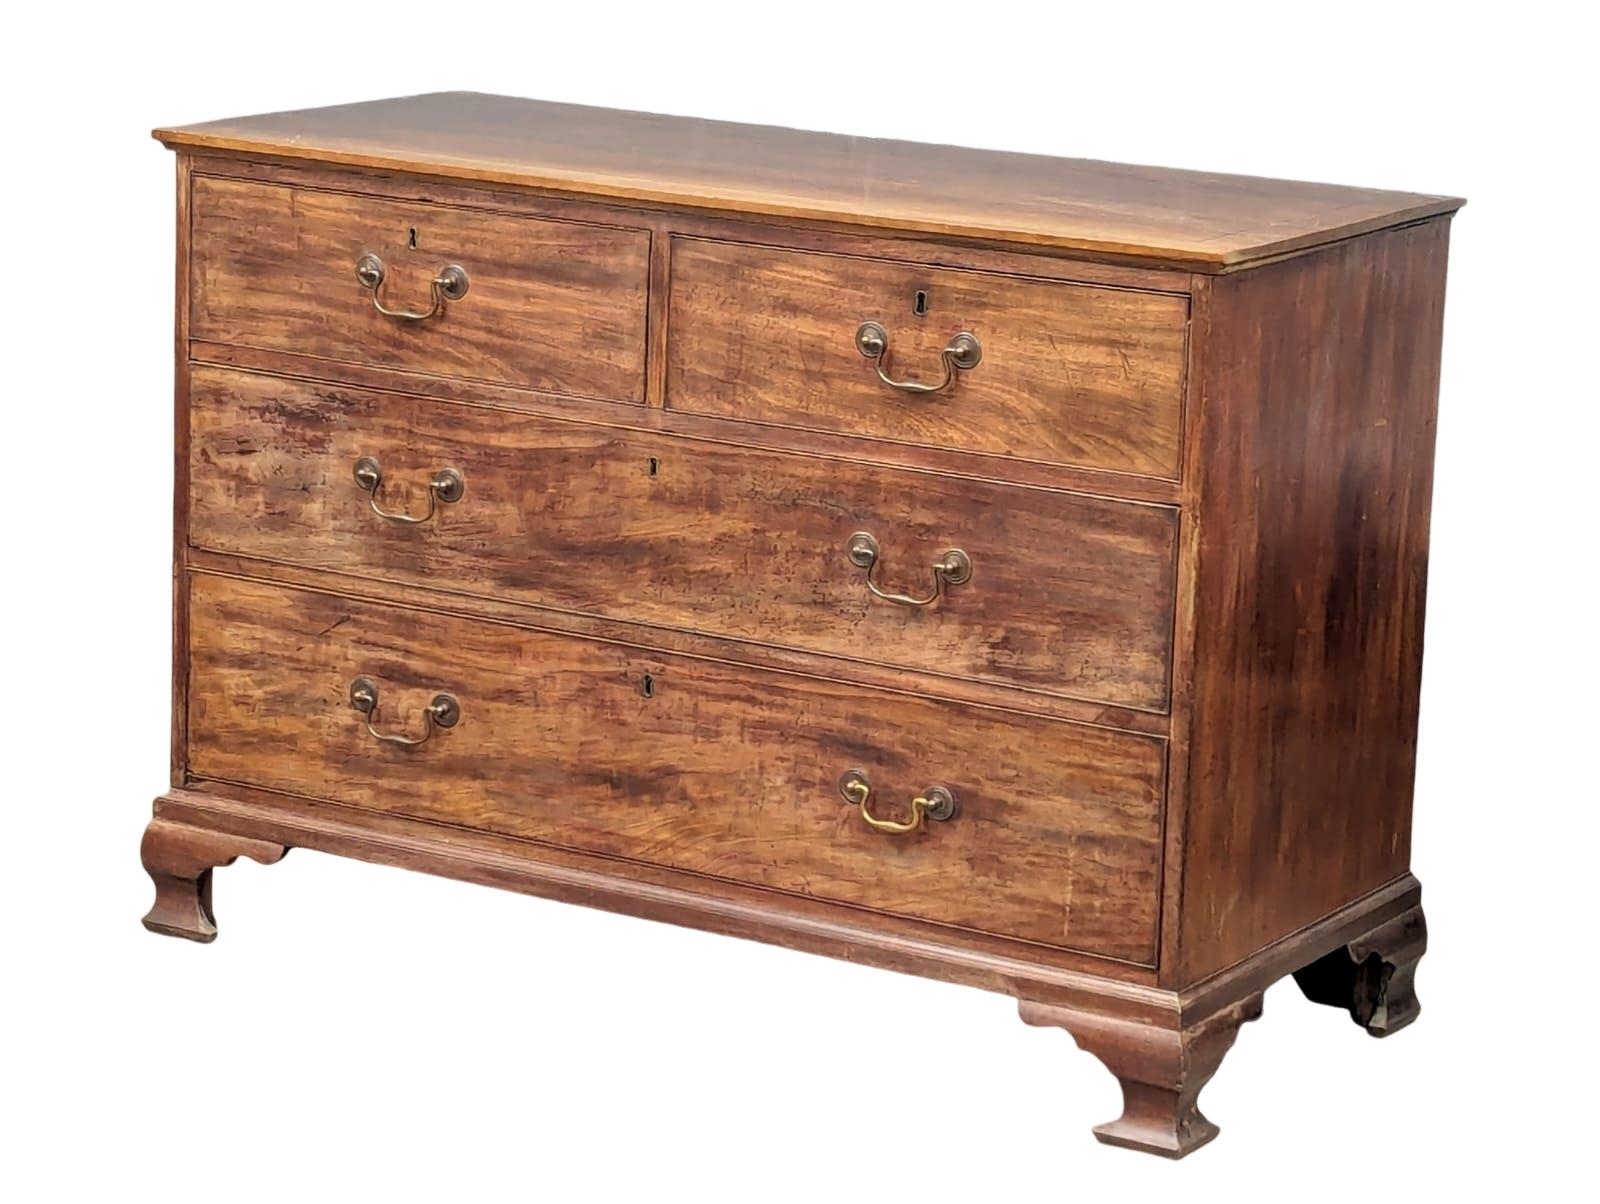 A George III mahogany oak lined chest of drawers on ogee feet and original brass drop handles. Circa